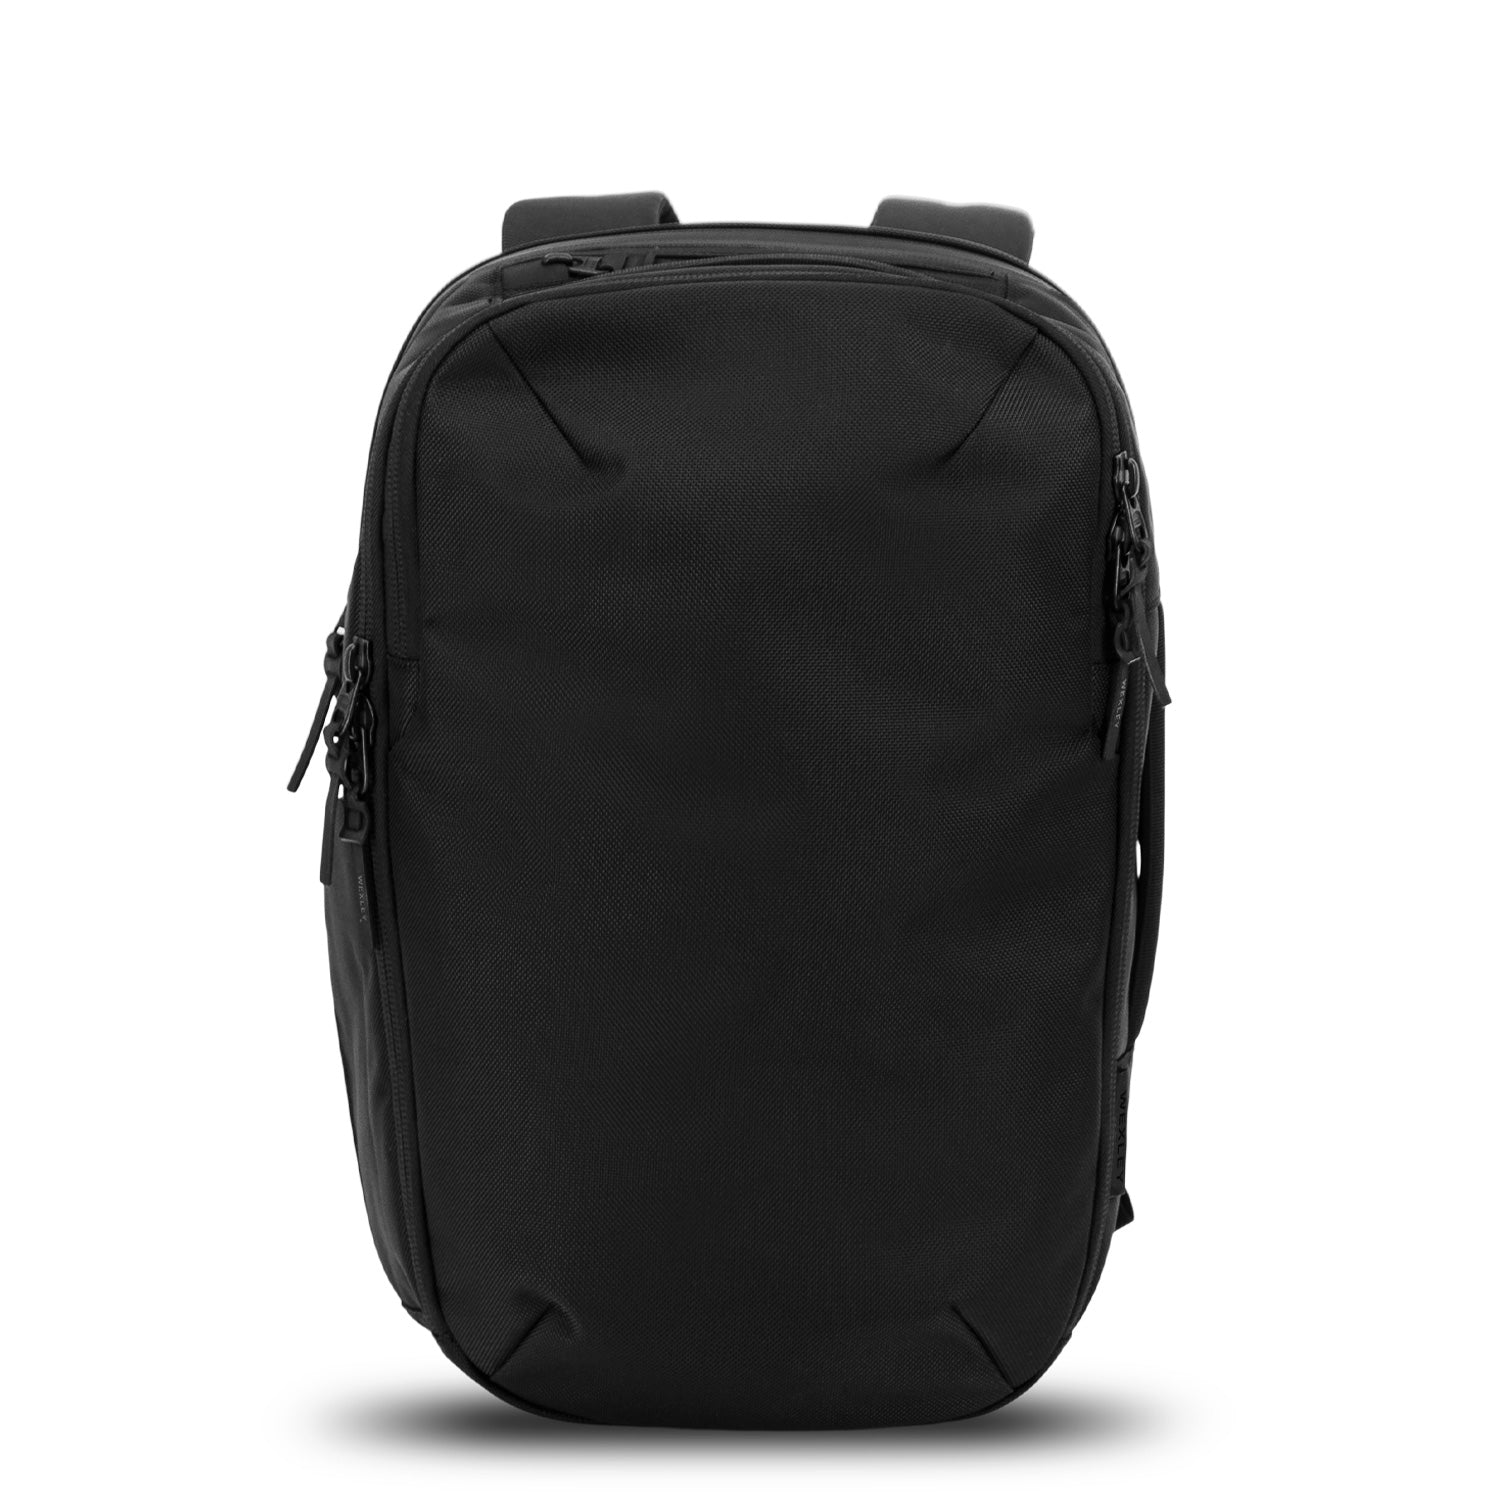 WEXLEY公式バッグ（BLACK）17L ほぼ新品W27xH47xD16cm